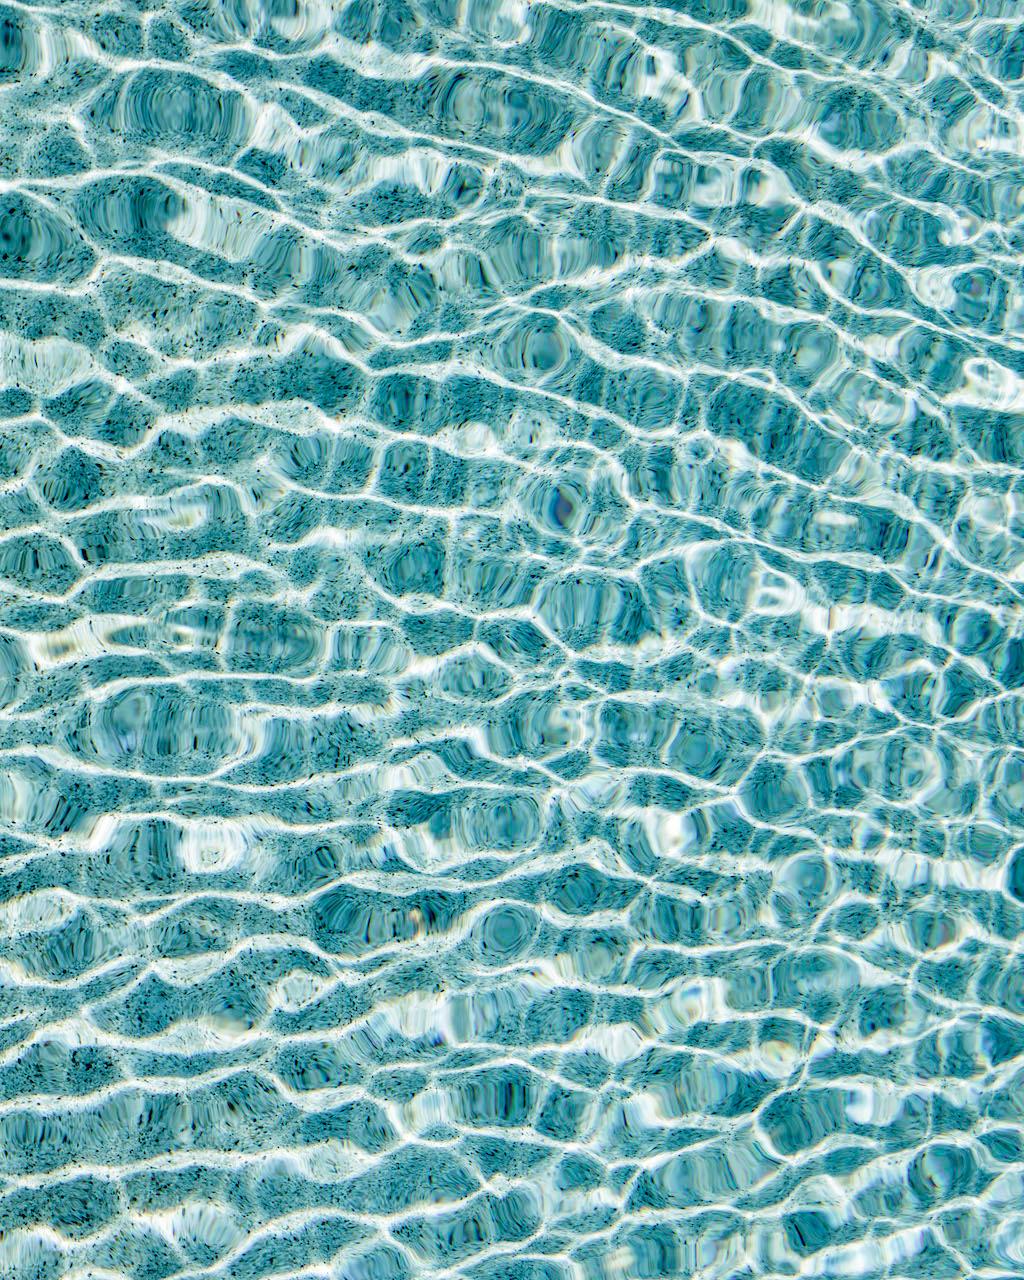 H2O IV - large format photograph of sun reflections on pool water surface